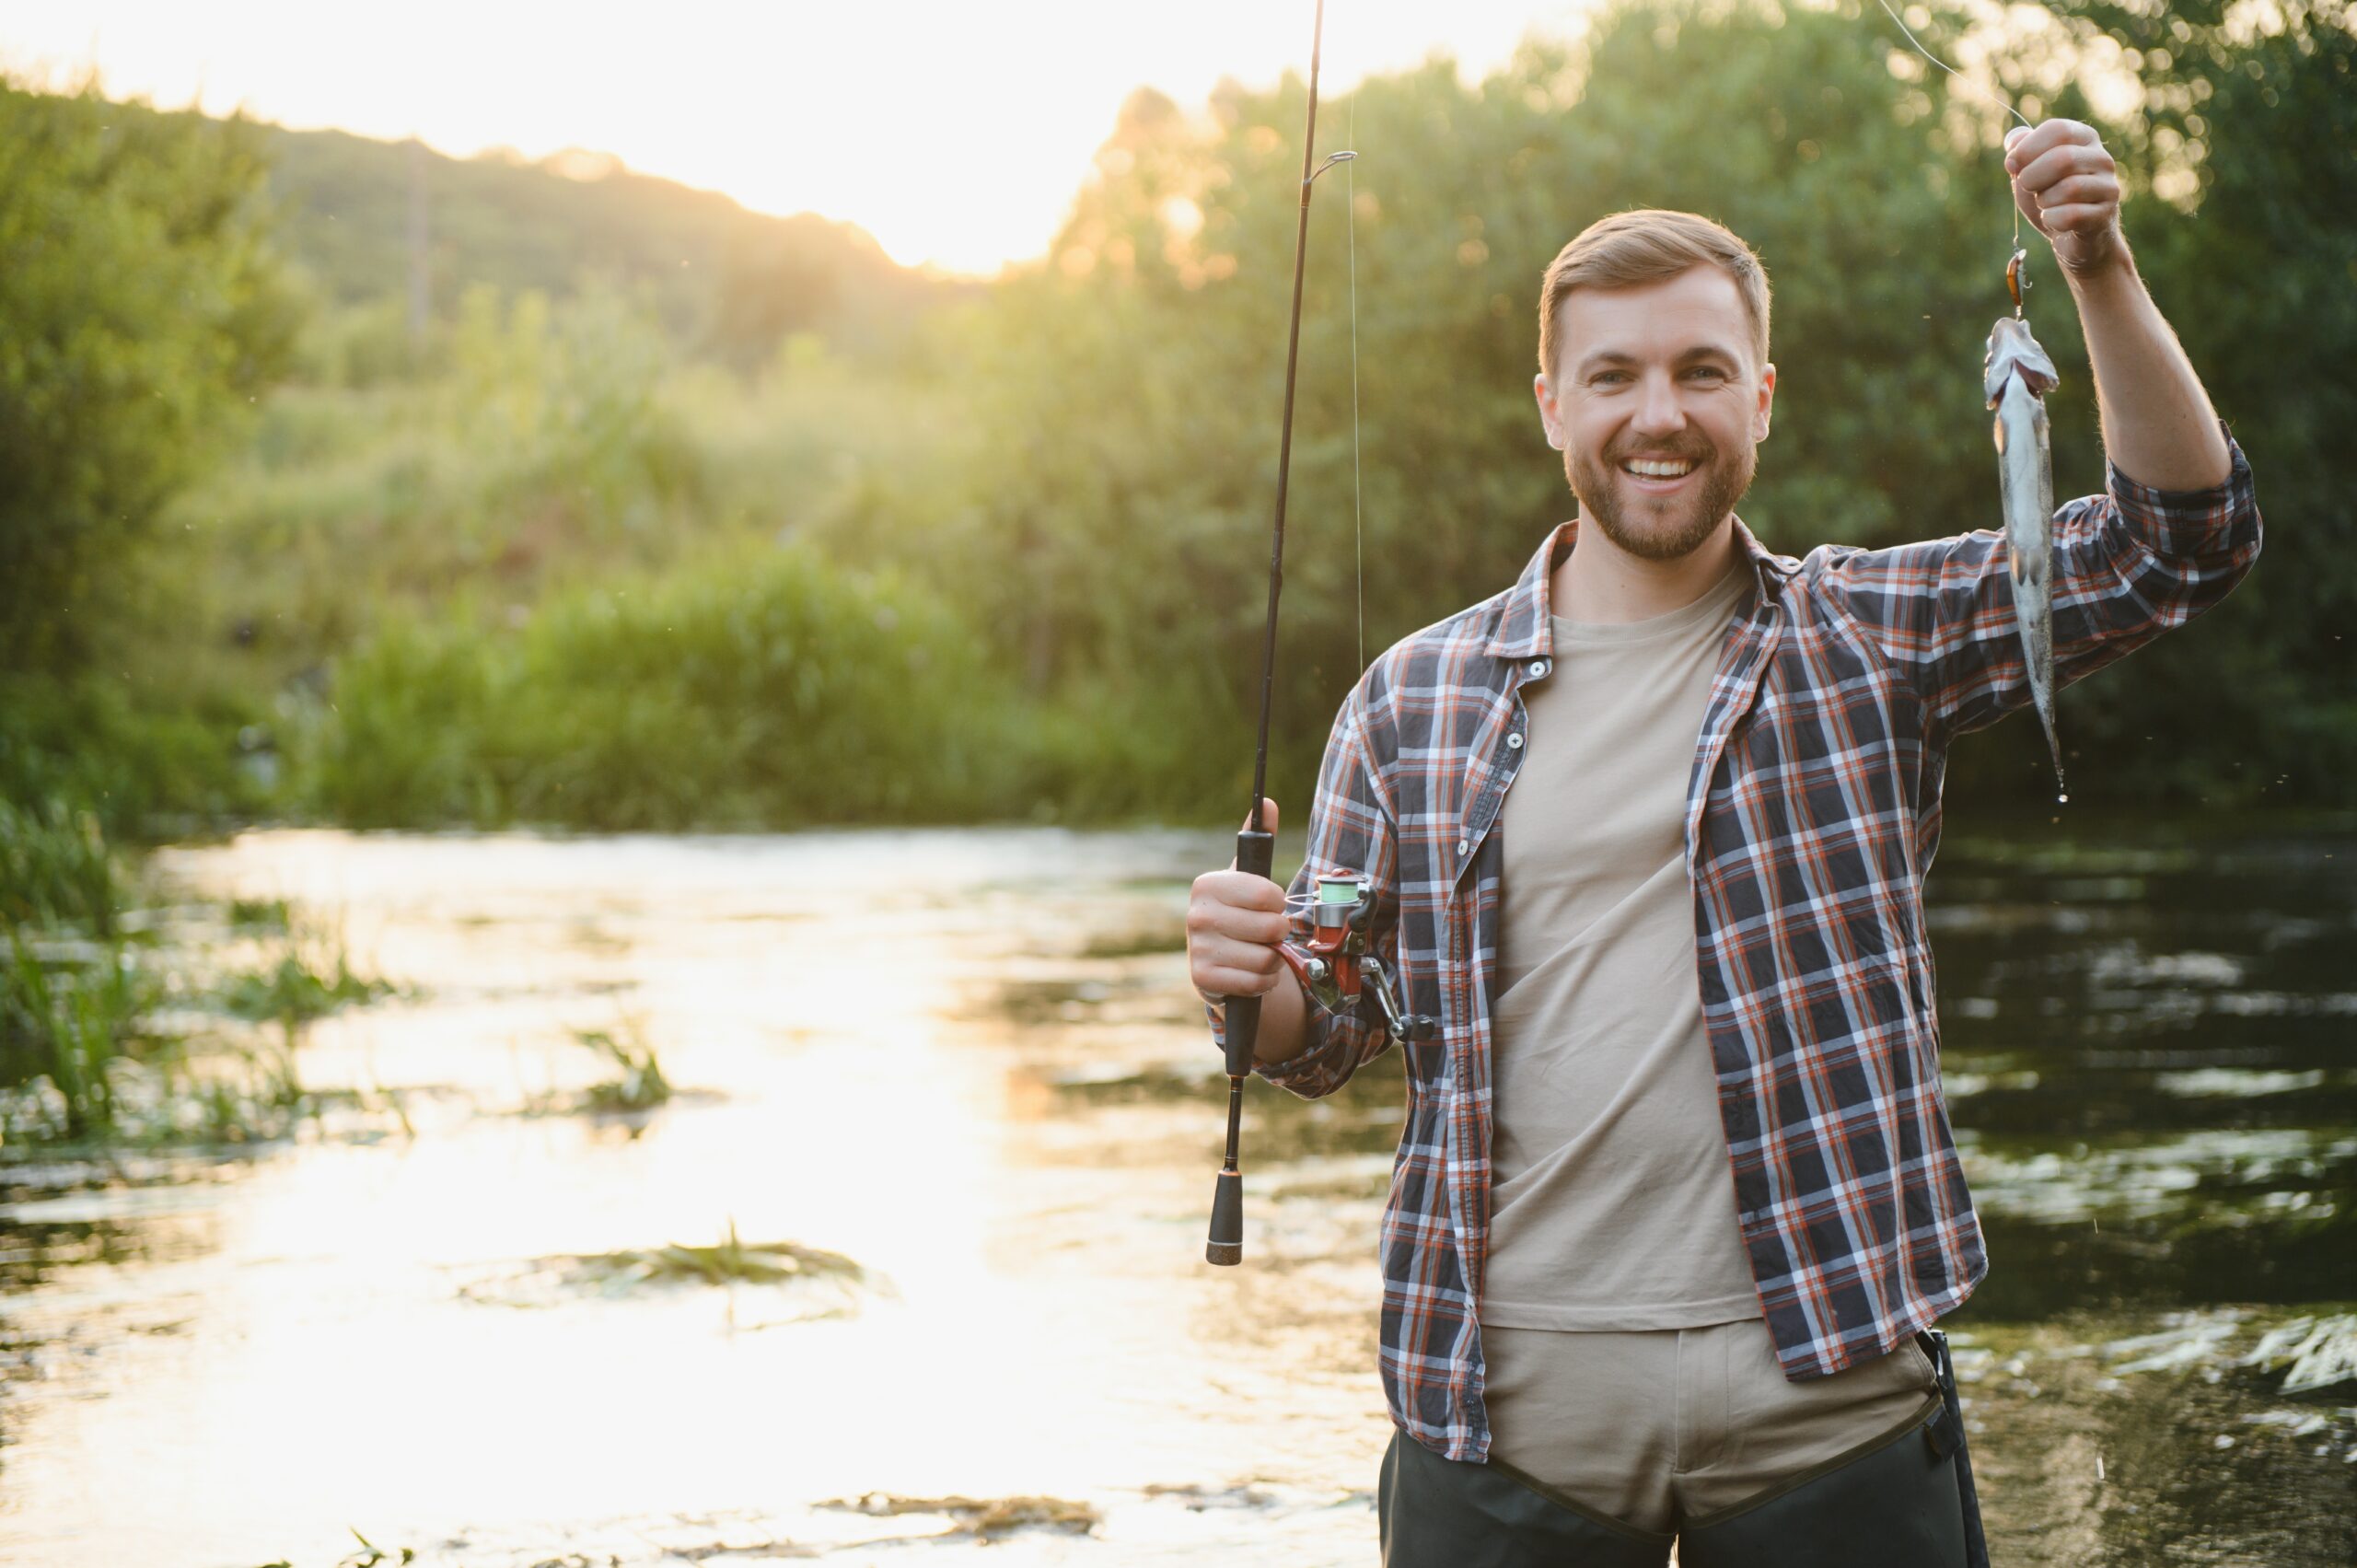 fanatic4fishing.com : What determines the kind of rod you should use when fishing?